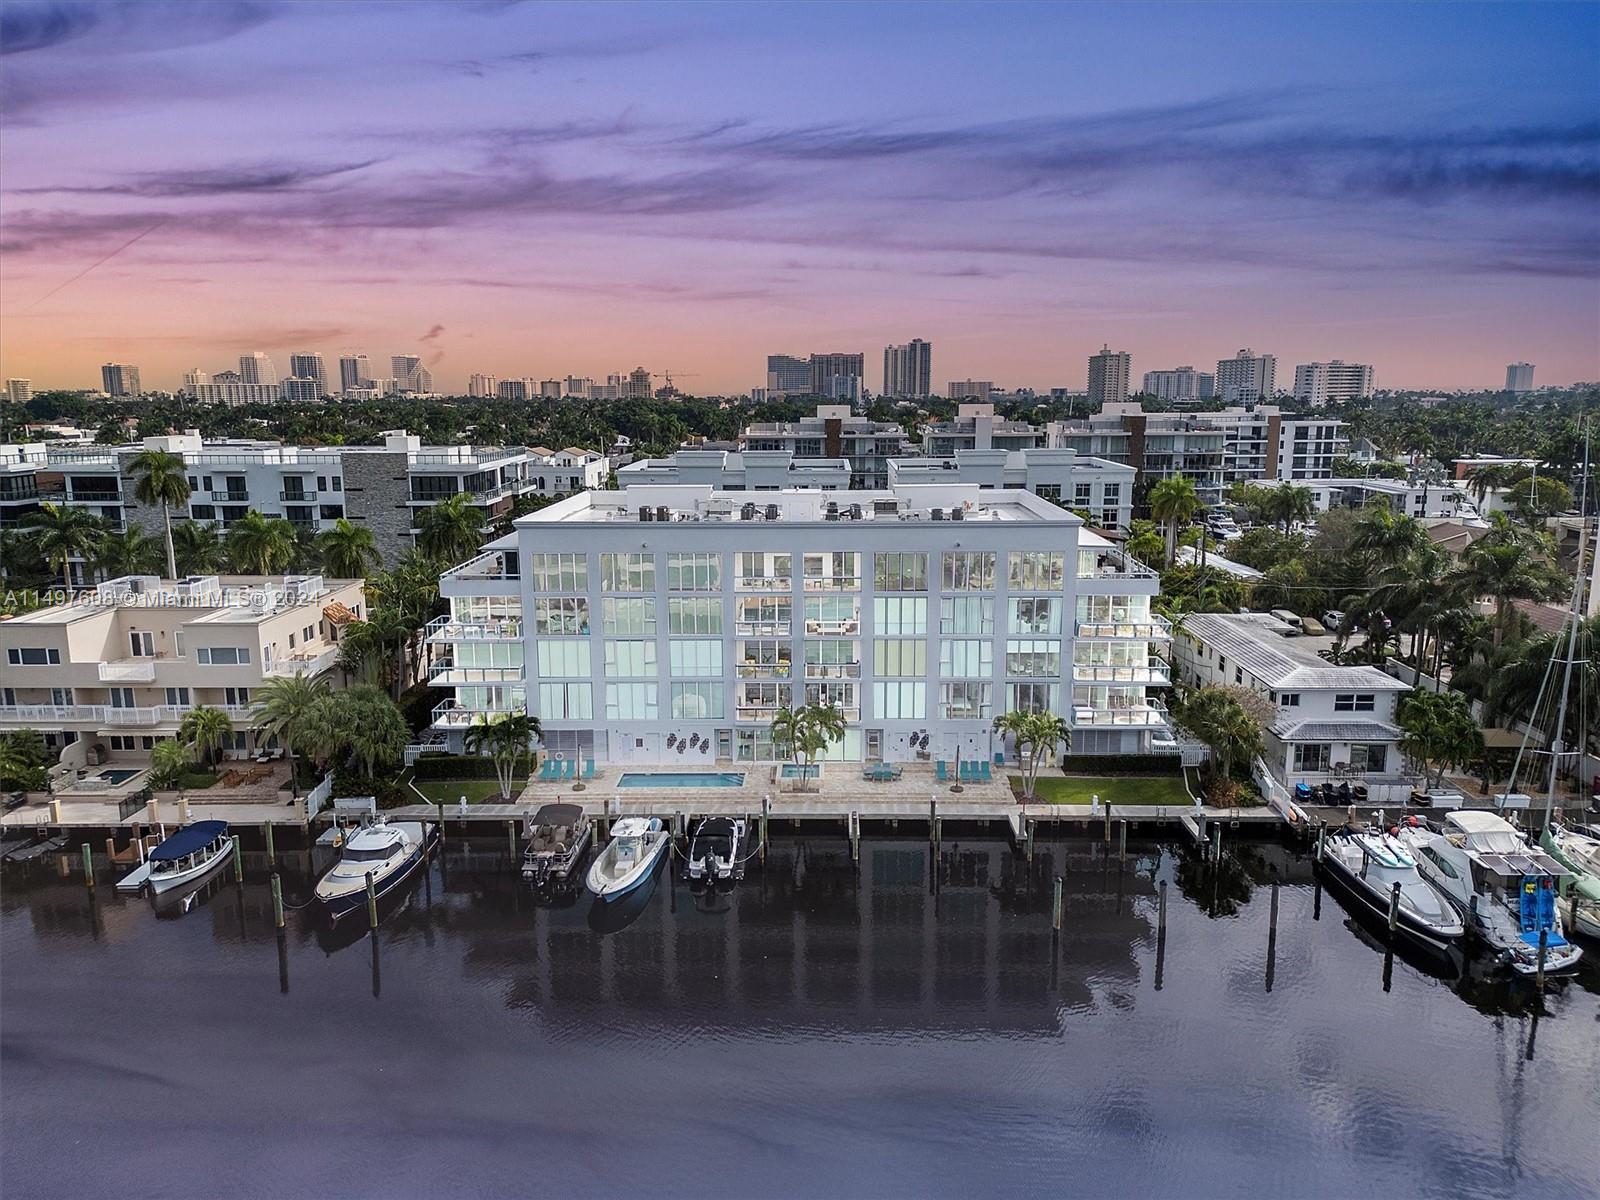 An EXTREMELY RARE opportunity awaits you in the heart of stunning Las Olas, Ft. Lauderdale. Picture this: a **DEEDED 40' dock** at your doorstep, AND direct ocean access. Inside this impressive unit you'll find yourself immersed in unparalleled elegance & space. Starting with the chef-style kitchen that boasts sleek, clean lines & top-of-the-line appliances & 3 ensuite bedrooms. But the luxury doesn't stop there, with 2 assigned garage parking spaces, 2 balconies offering breathtaking intracoastal views, this European-inspired retreat is truly a gem. Every detail has been meticulously crafted. Entertain effortlessly w/a dry bar, wine/champagne fridge, and Creston prewiring for seamless control of music, TVs, and drapes. This technologically advanced home enhances your waterside experience.